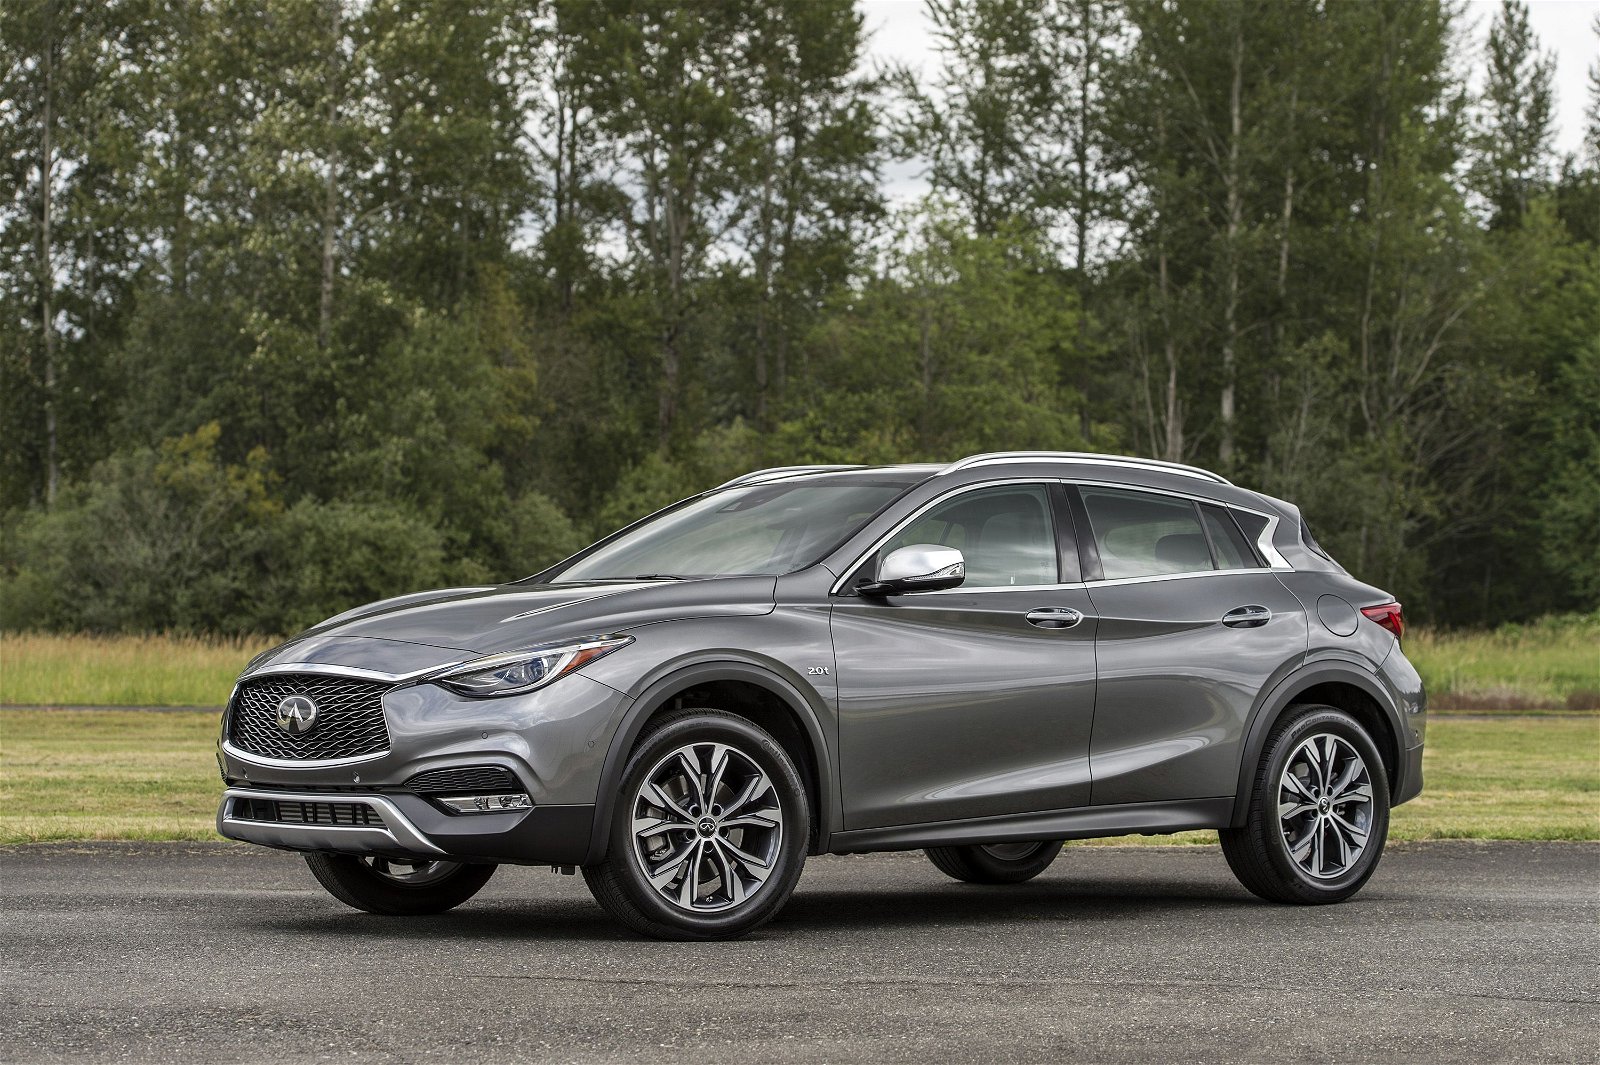 Infiniti Infiniti's QX30 SUV joins a crowded field of premium crossovers vying for attention. 